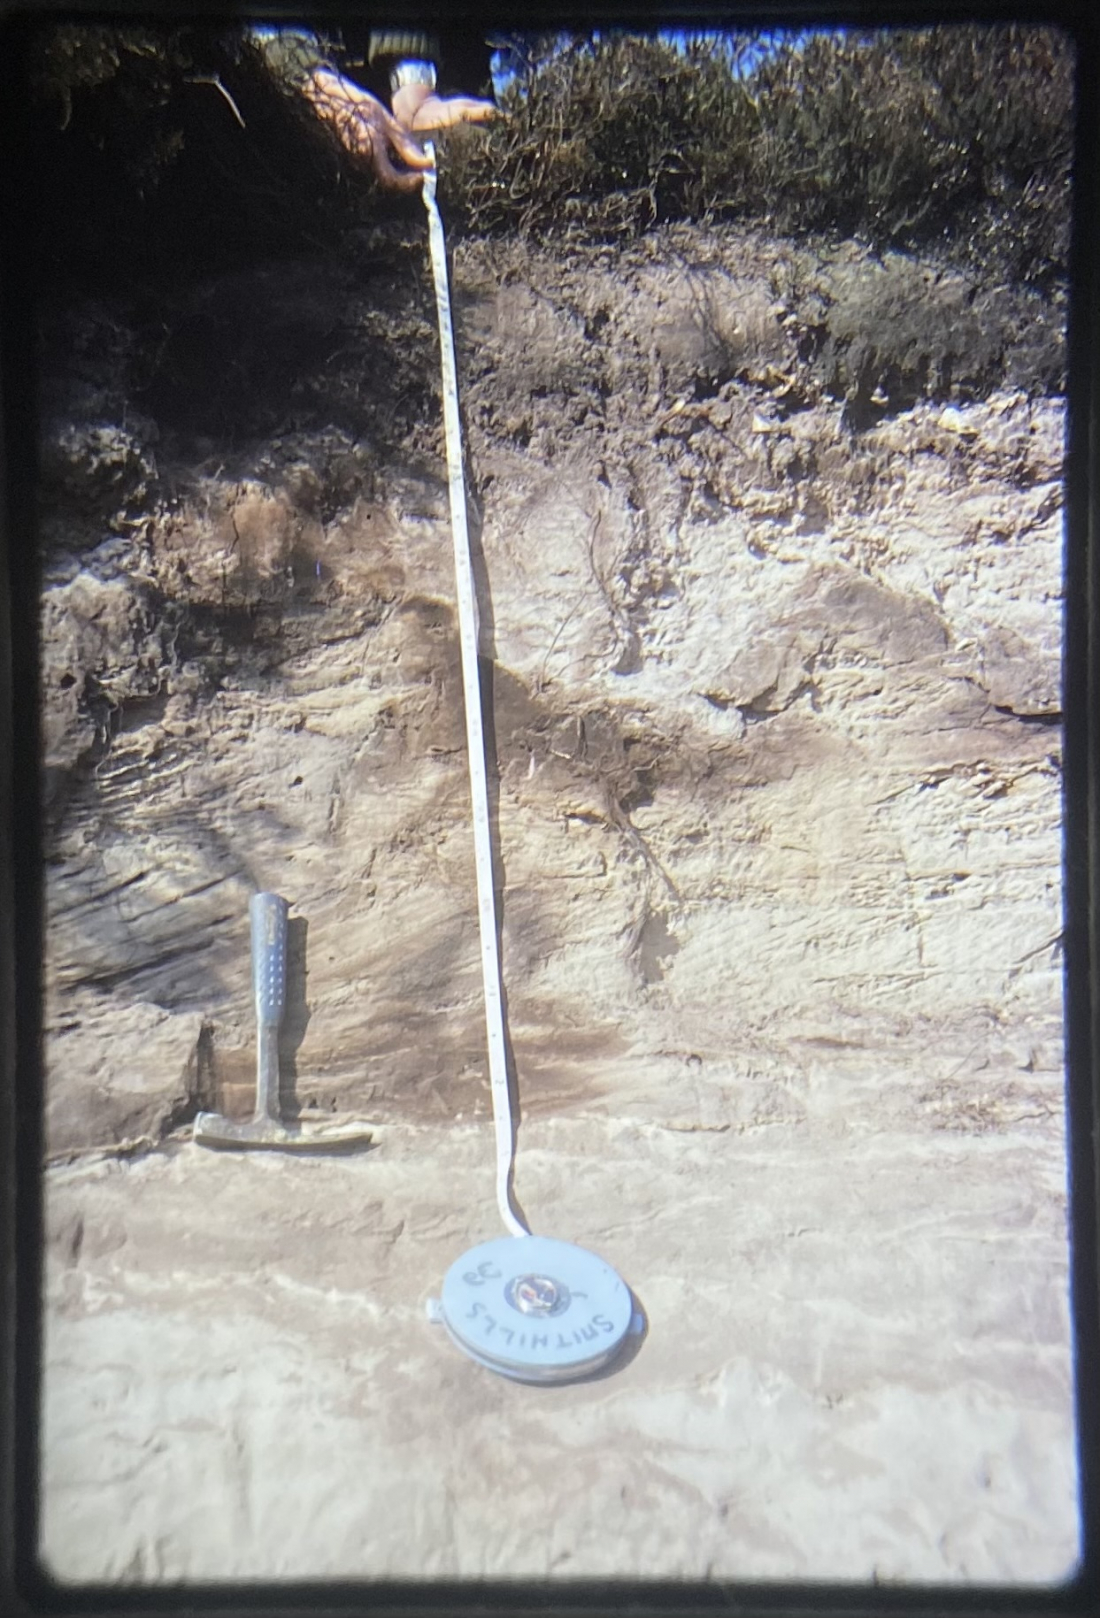 The Tape Measure (1963): An image from 1963 from Georgie’s Grandfather's photo archive: a geology field trip to Dorset, featuring a tape measure and pickaxe, measuring earth layers. Shot on film.